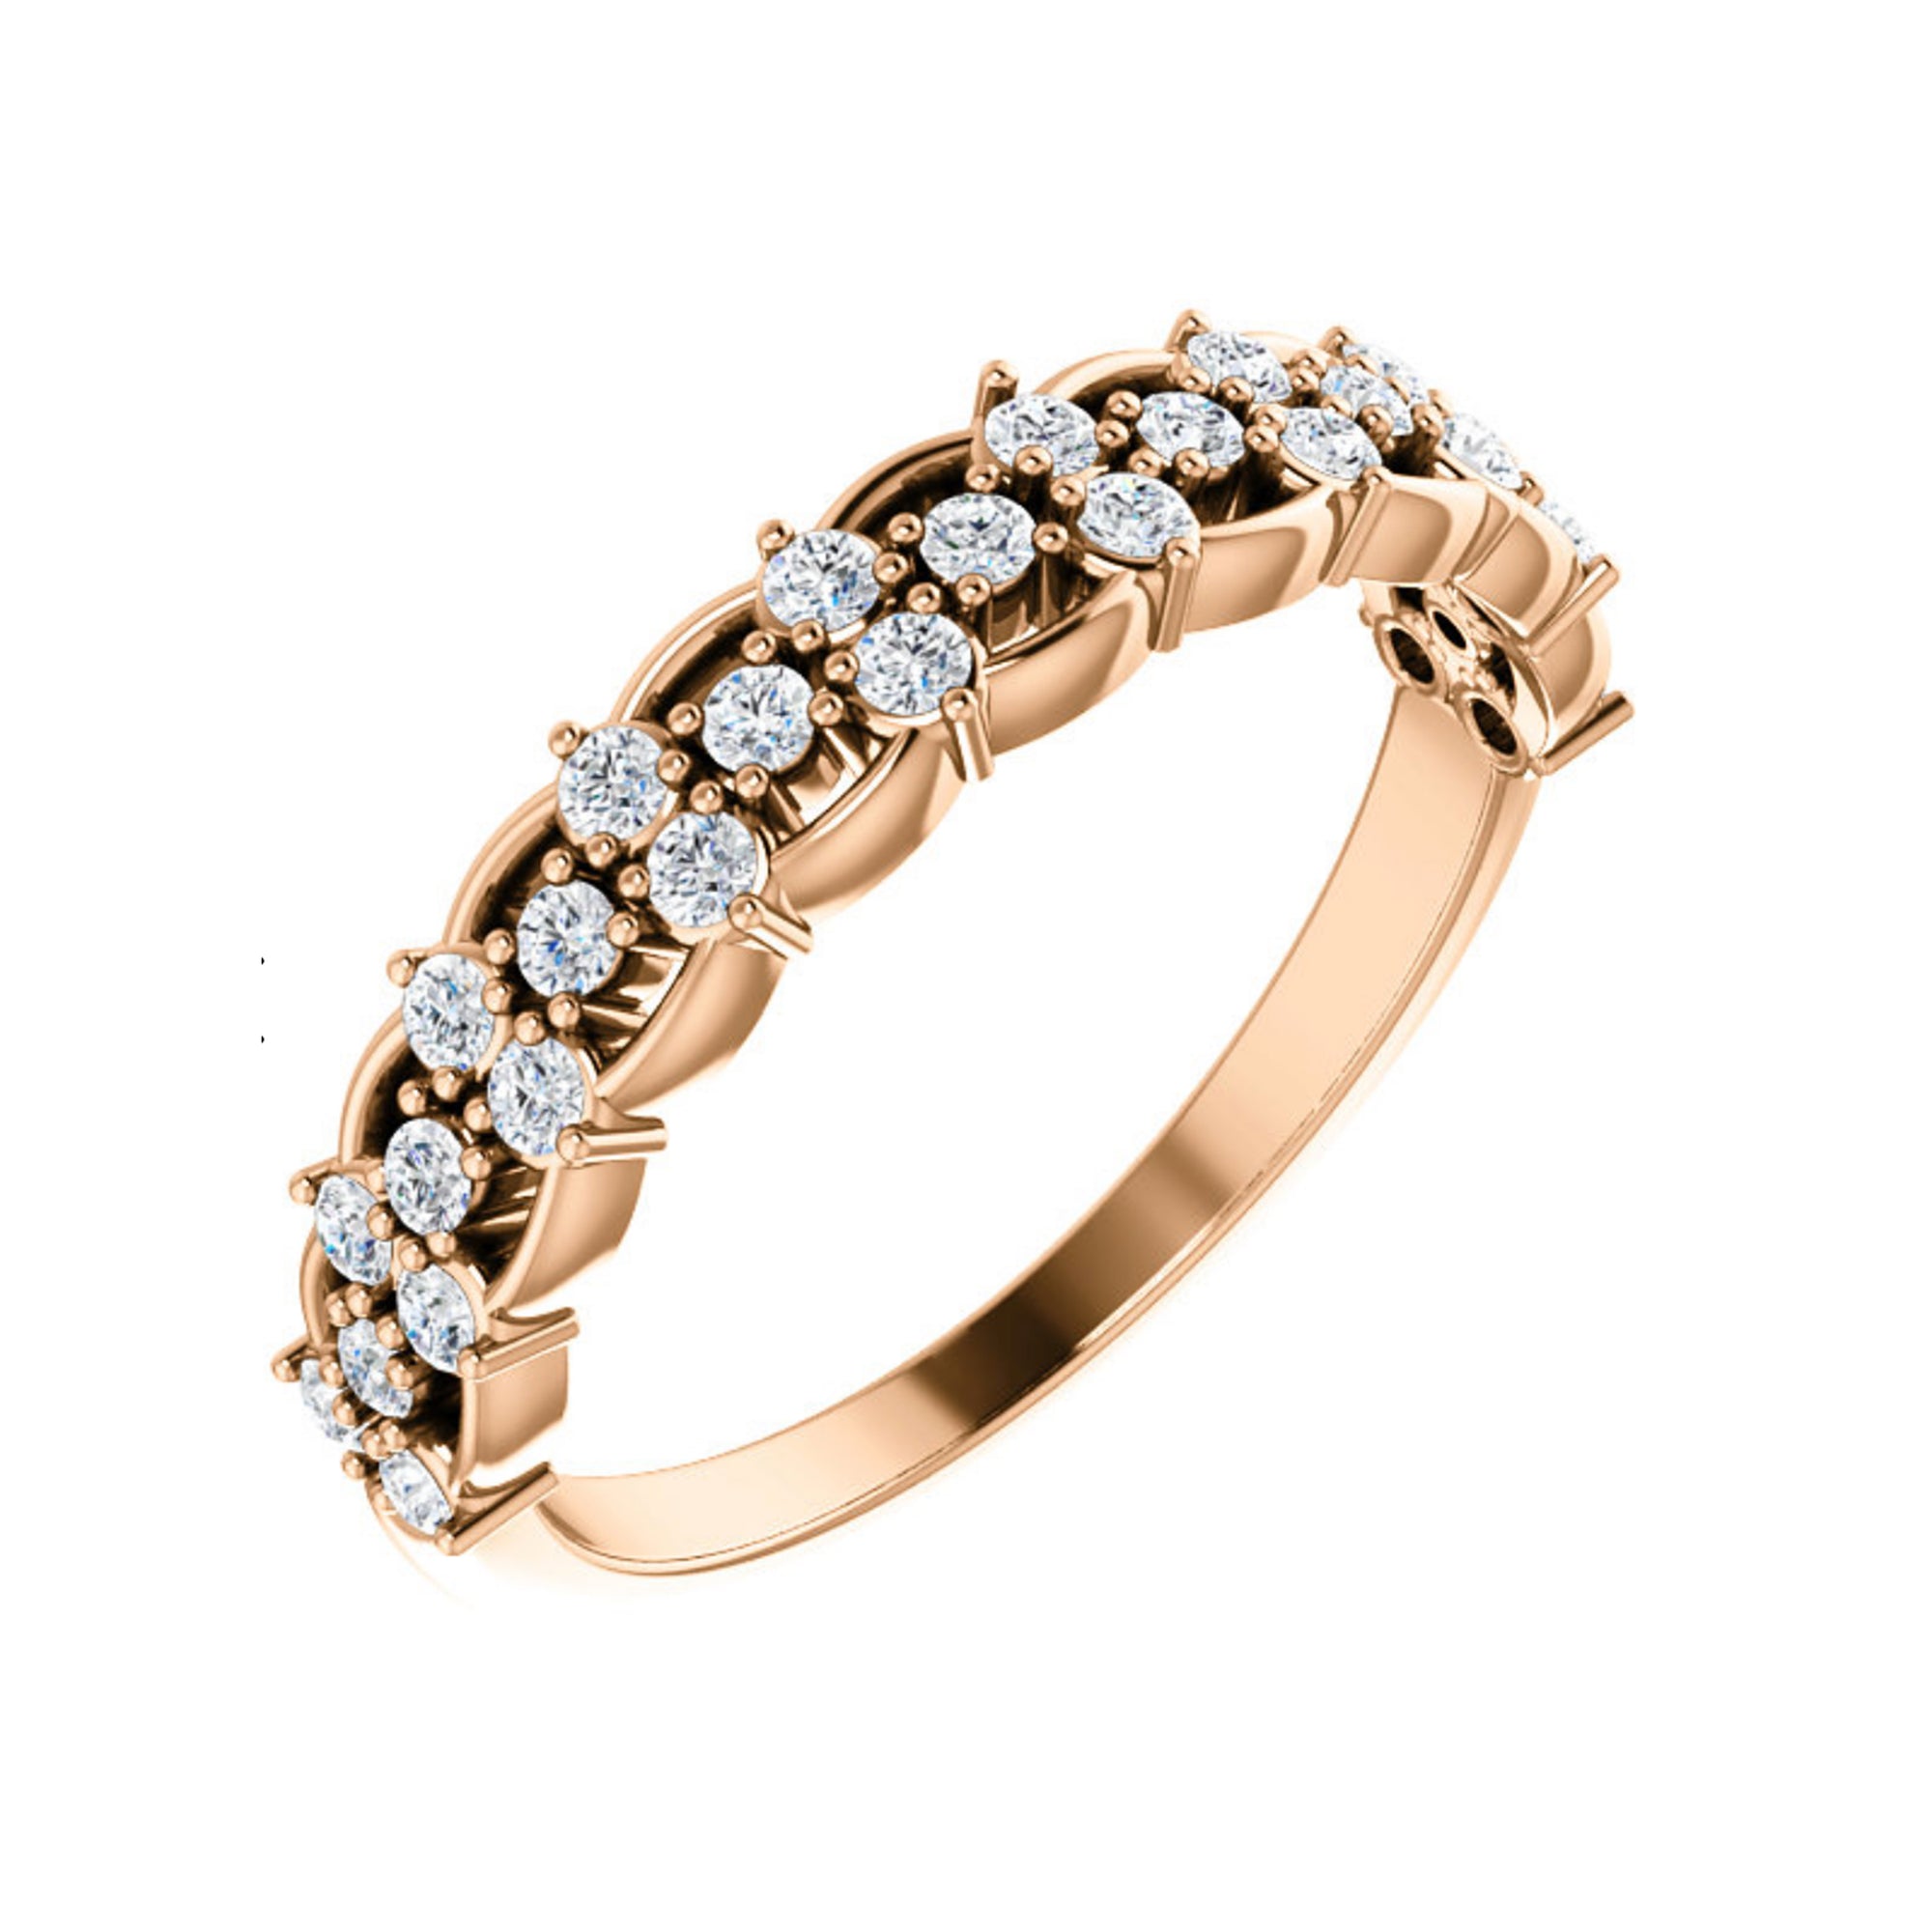 Diamond Felicity Stacking Band in White, Yellow or Rose Gold - Talisman Collection Fine Jewelers